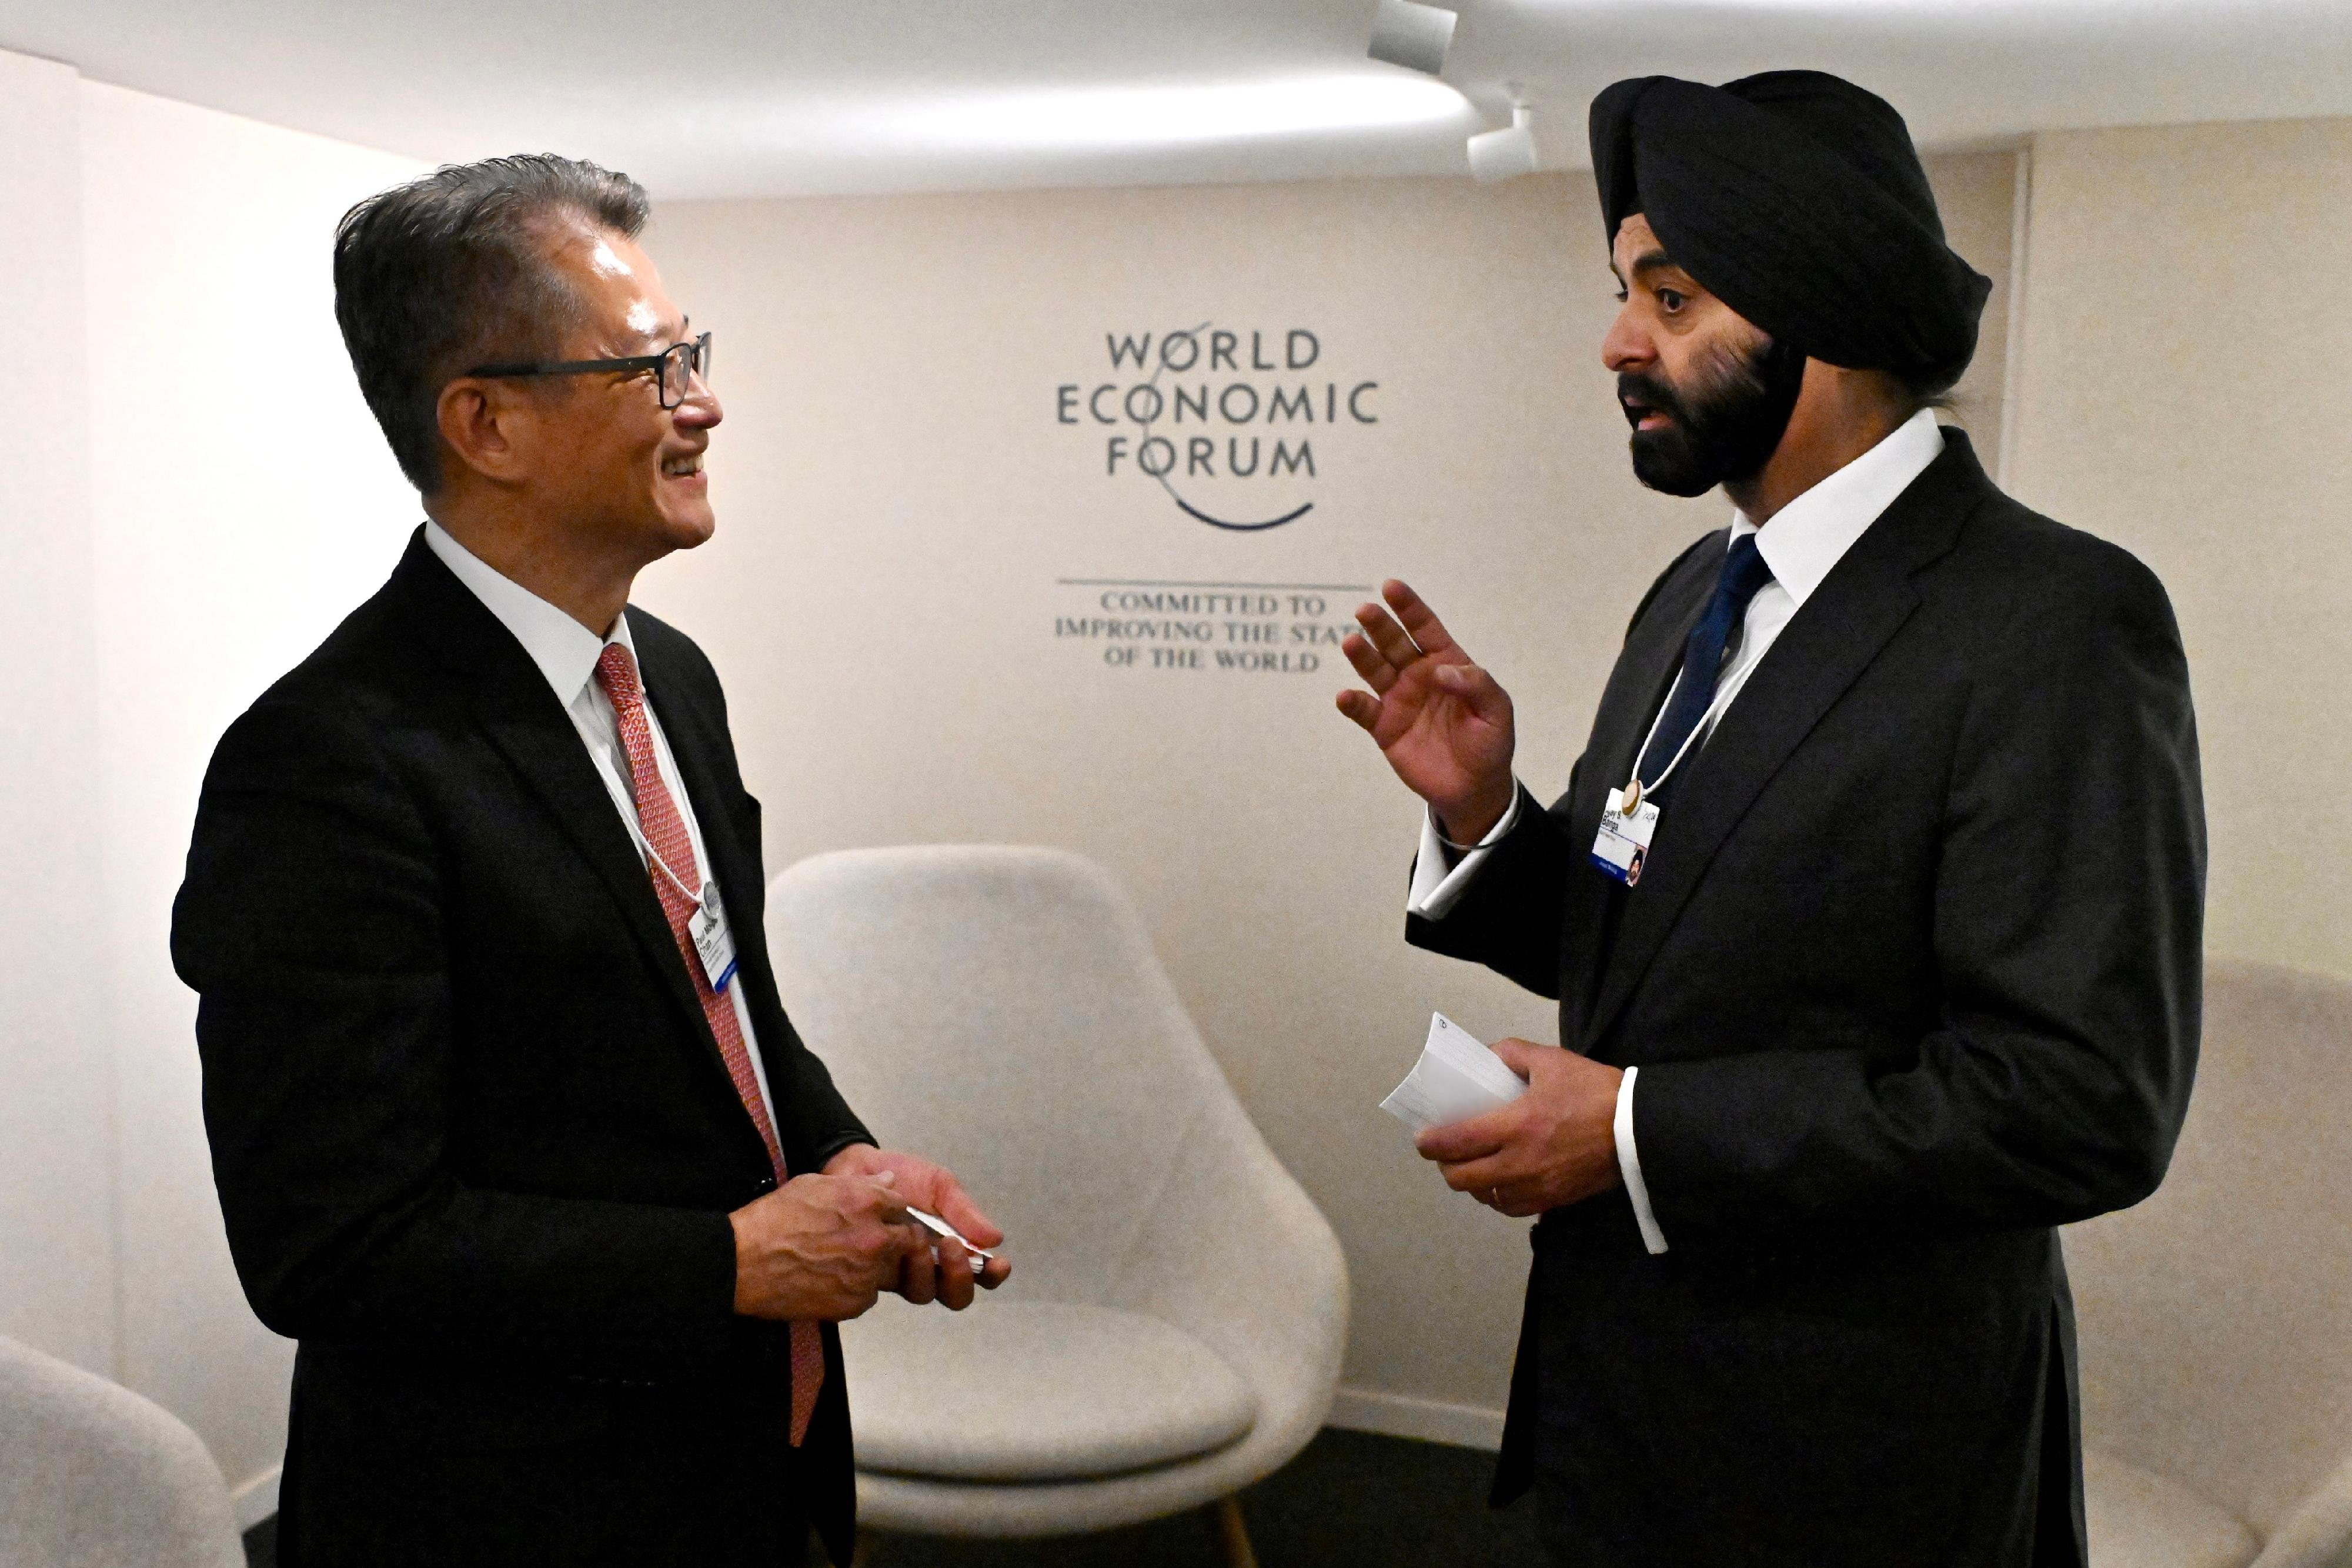 The Financial Secretary, Mr Paul Chan, continued to attend the World Economic Forum Annual Meeting at Davos, Switzerland, yesterday (January 16, Davos time). Photo shows Mr Chan (left) meeting with the President of the World Bank Group, Mr Ajay Banga (right).